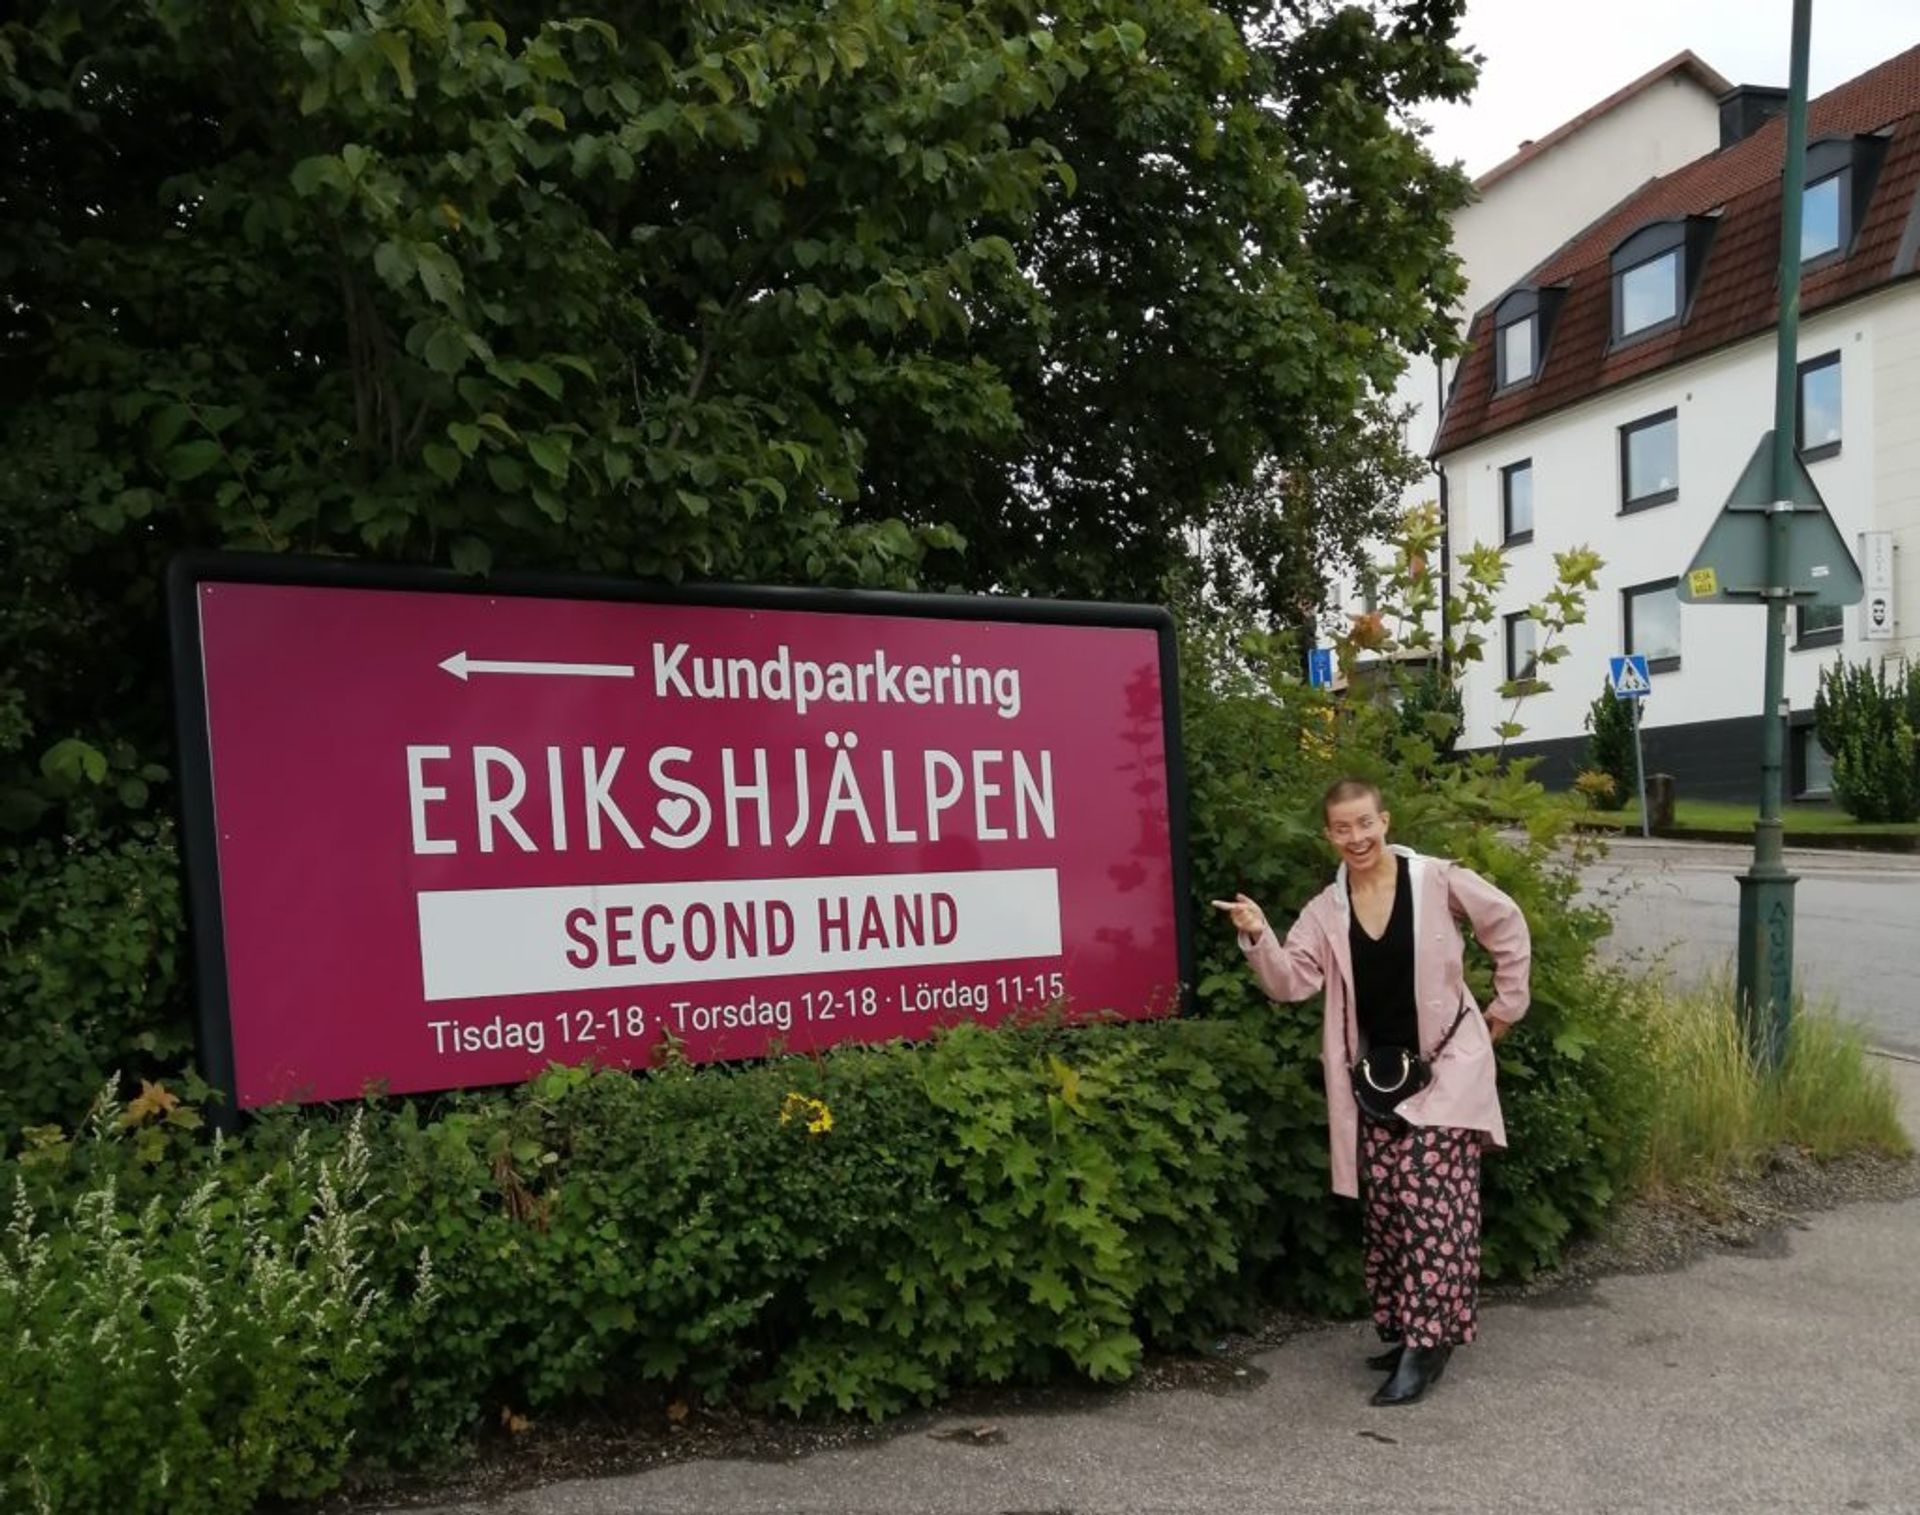 Lusanda's friend Vera standing by the sign pointing to the Erikshjälpen second hand store.